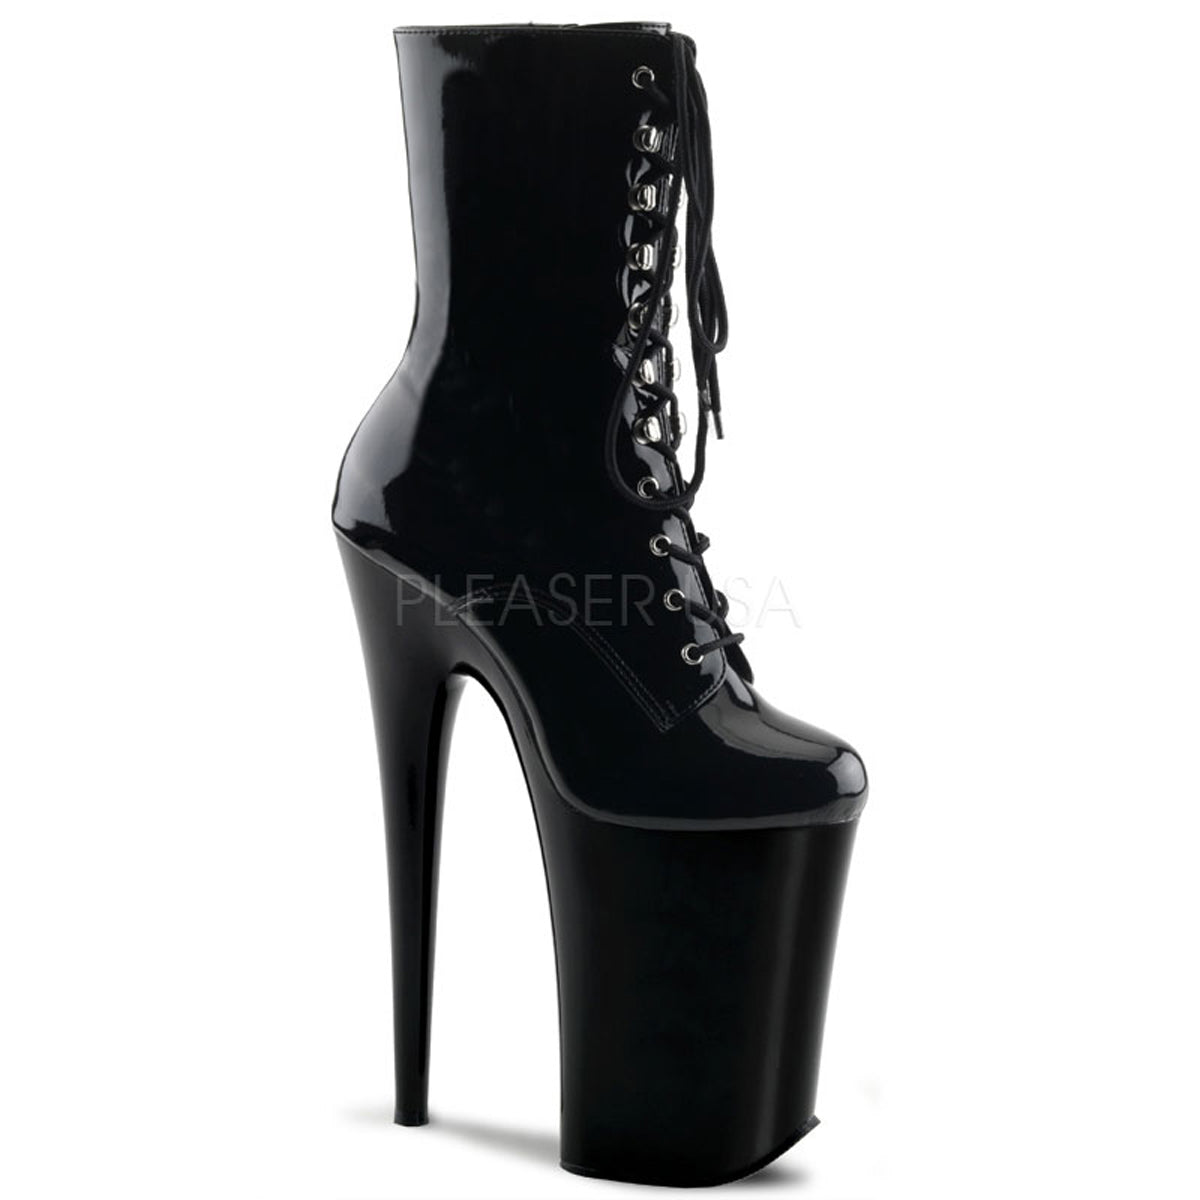 Pleaser Infinity 1020 Black - Model Express Vancouver